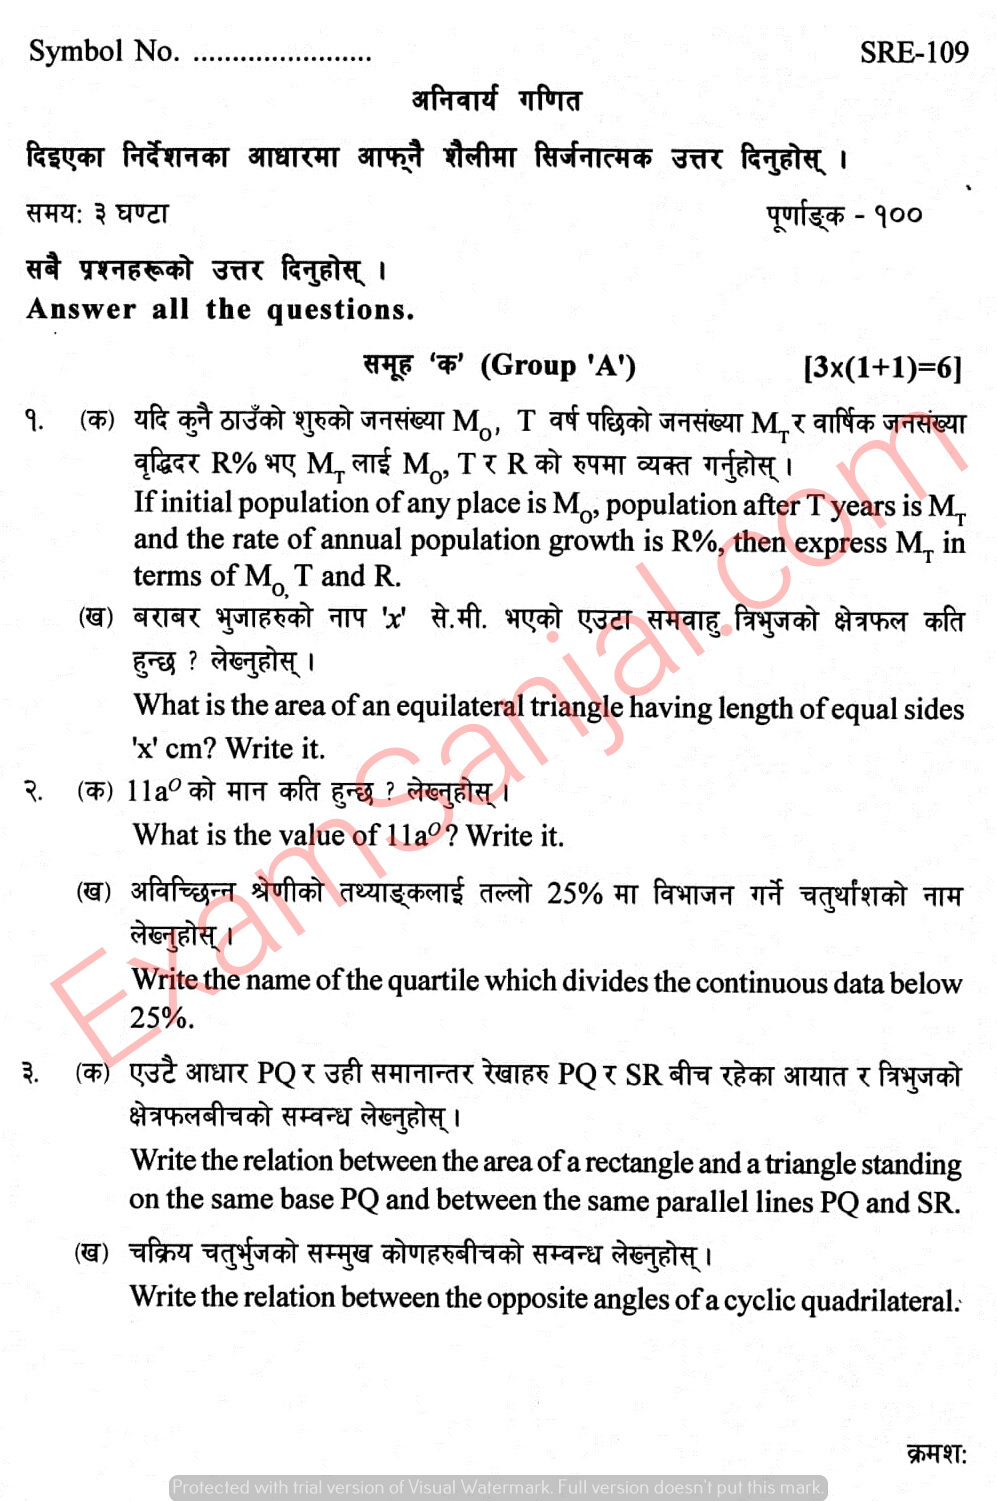 See Exam 2076 Model Question Practice Set Maths Exam Sanjal